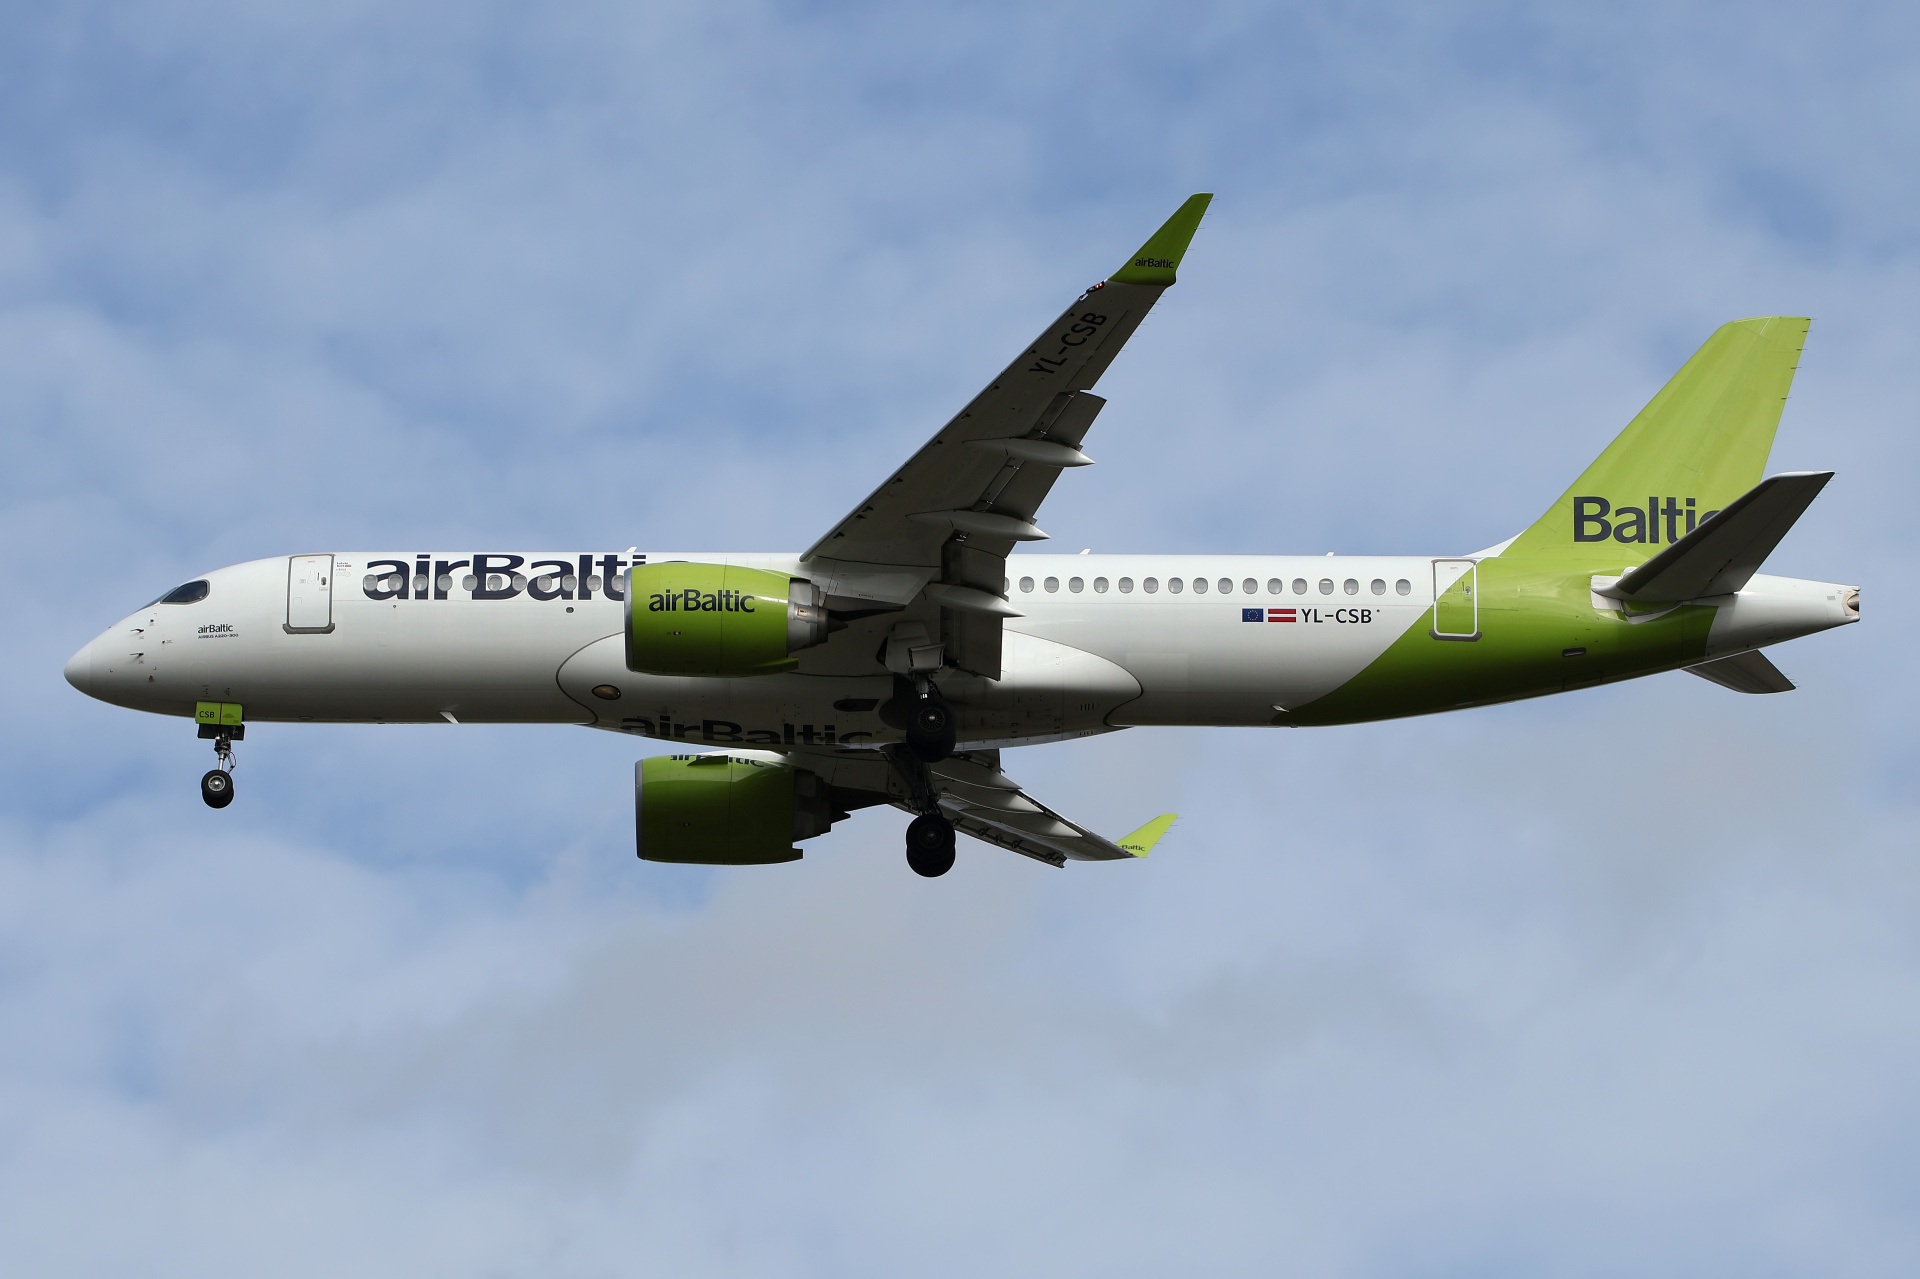 YL-CSB (Aircraft » EPWA Spotting » Airbus A220-300 » airBaltic)